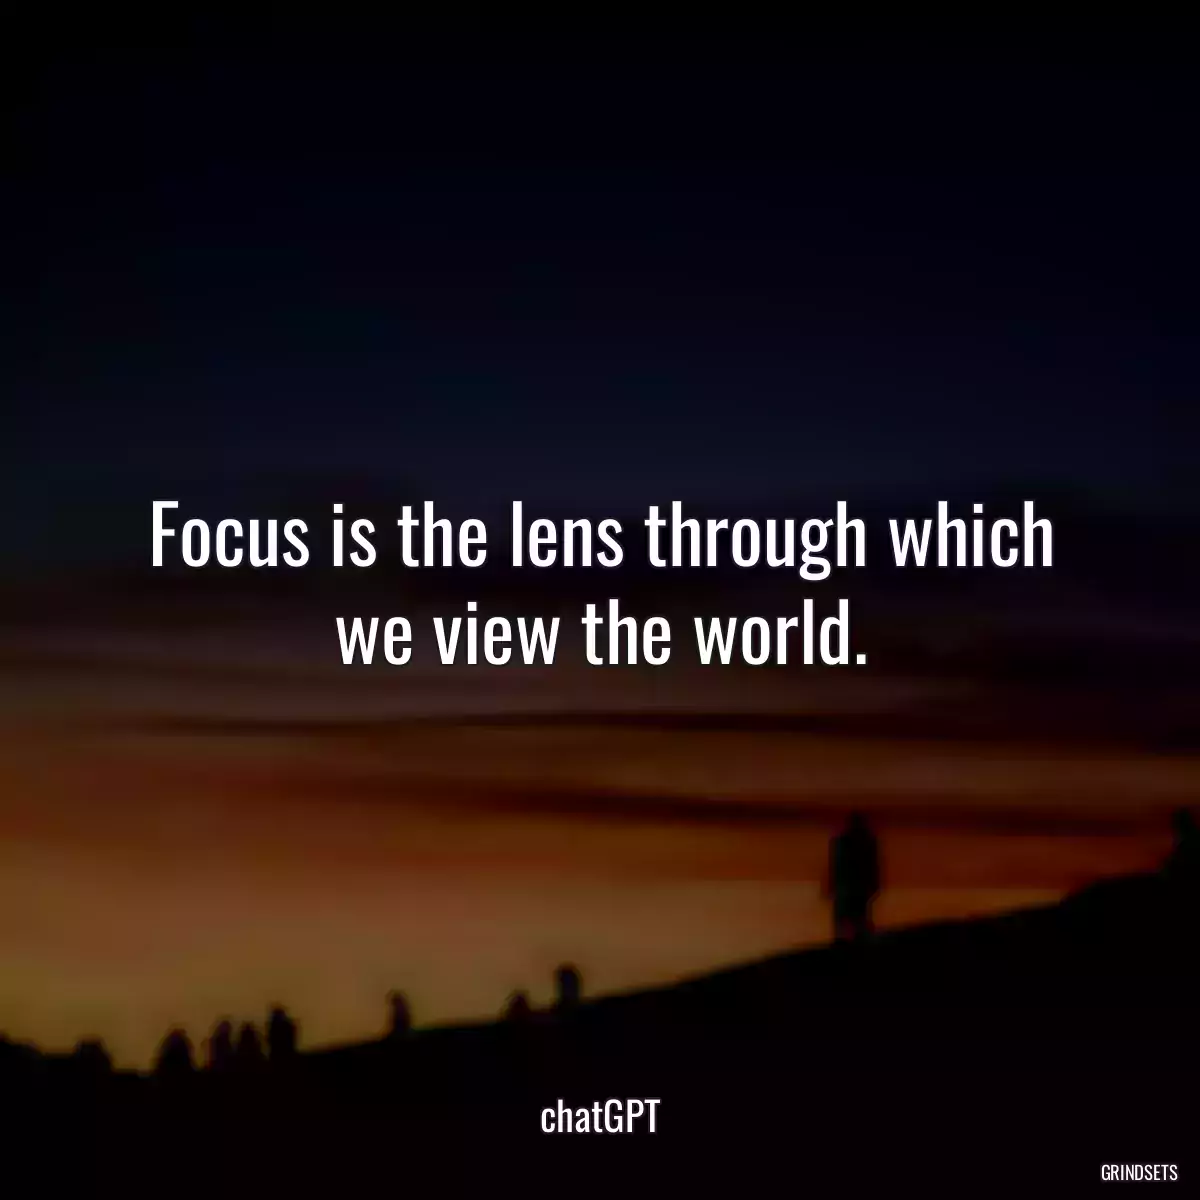 Focus is the lens through which we view the world.